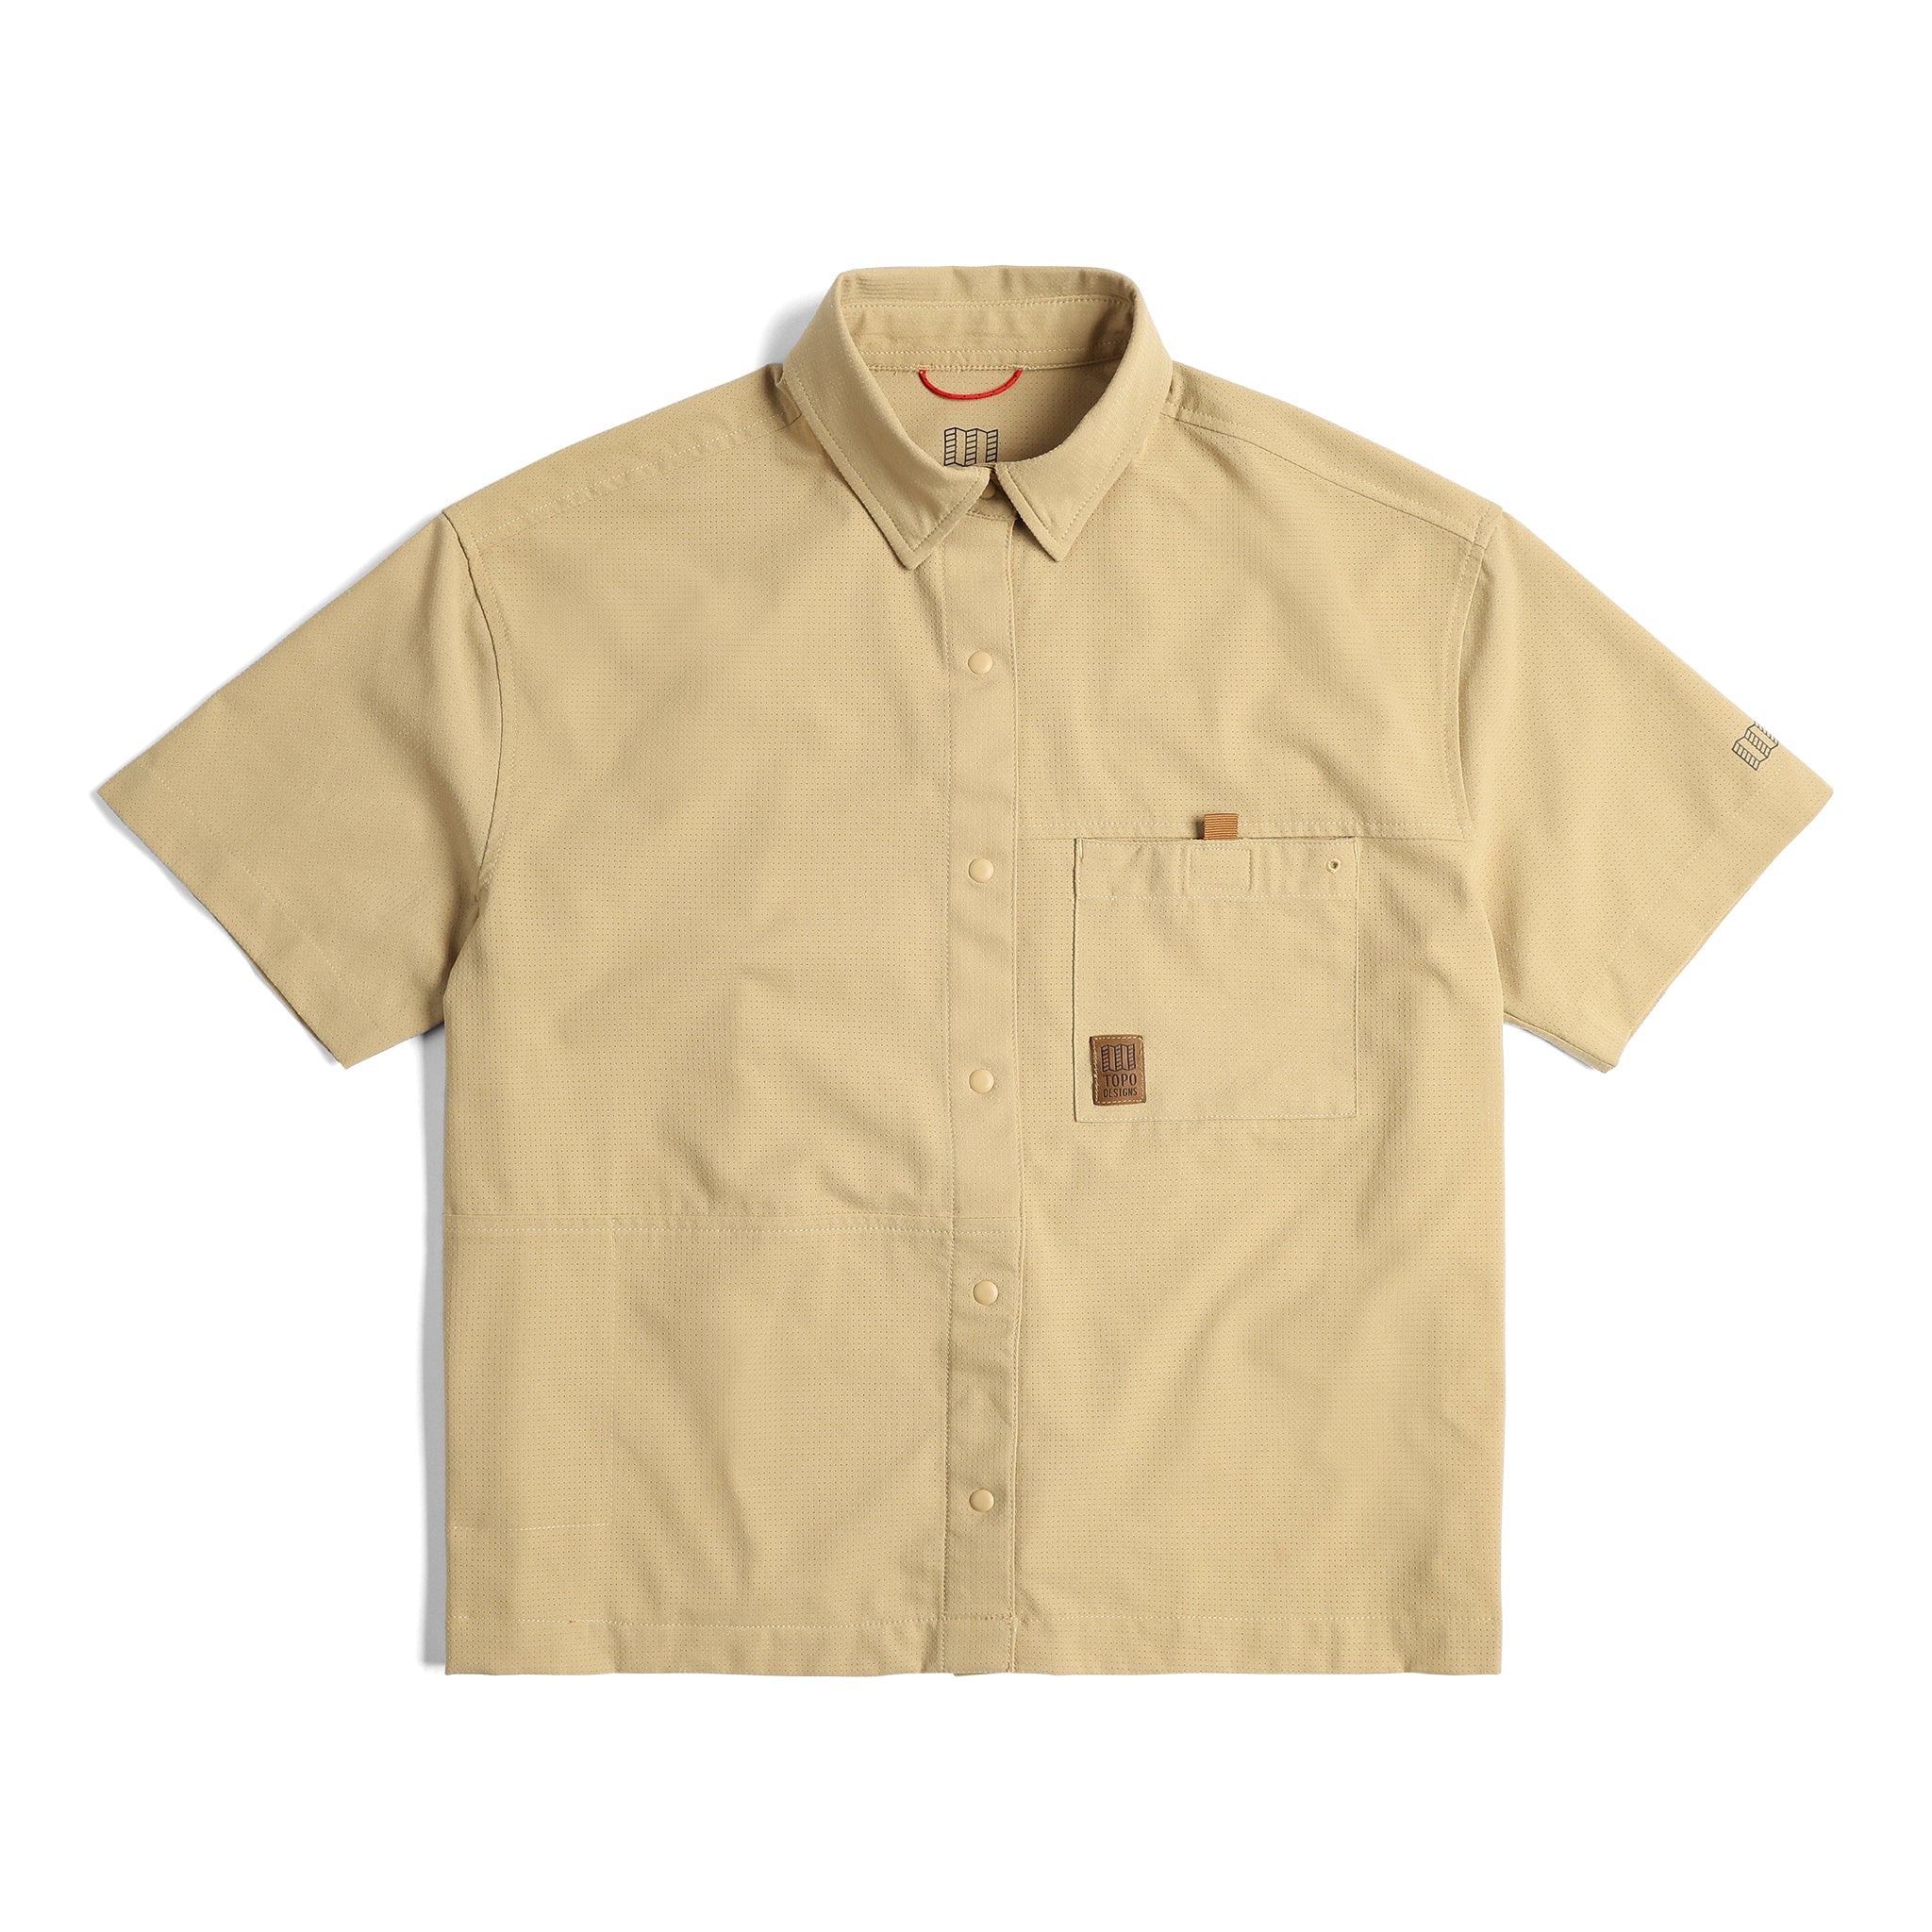 Front View of Topo Designs Retro River Shirt Ss - Women's in "Sahara"